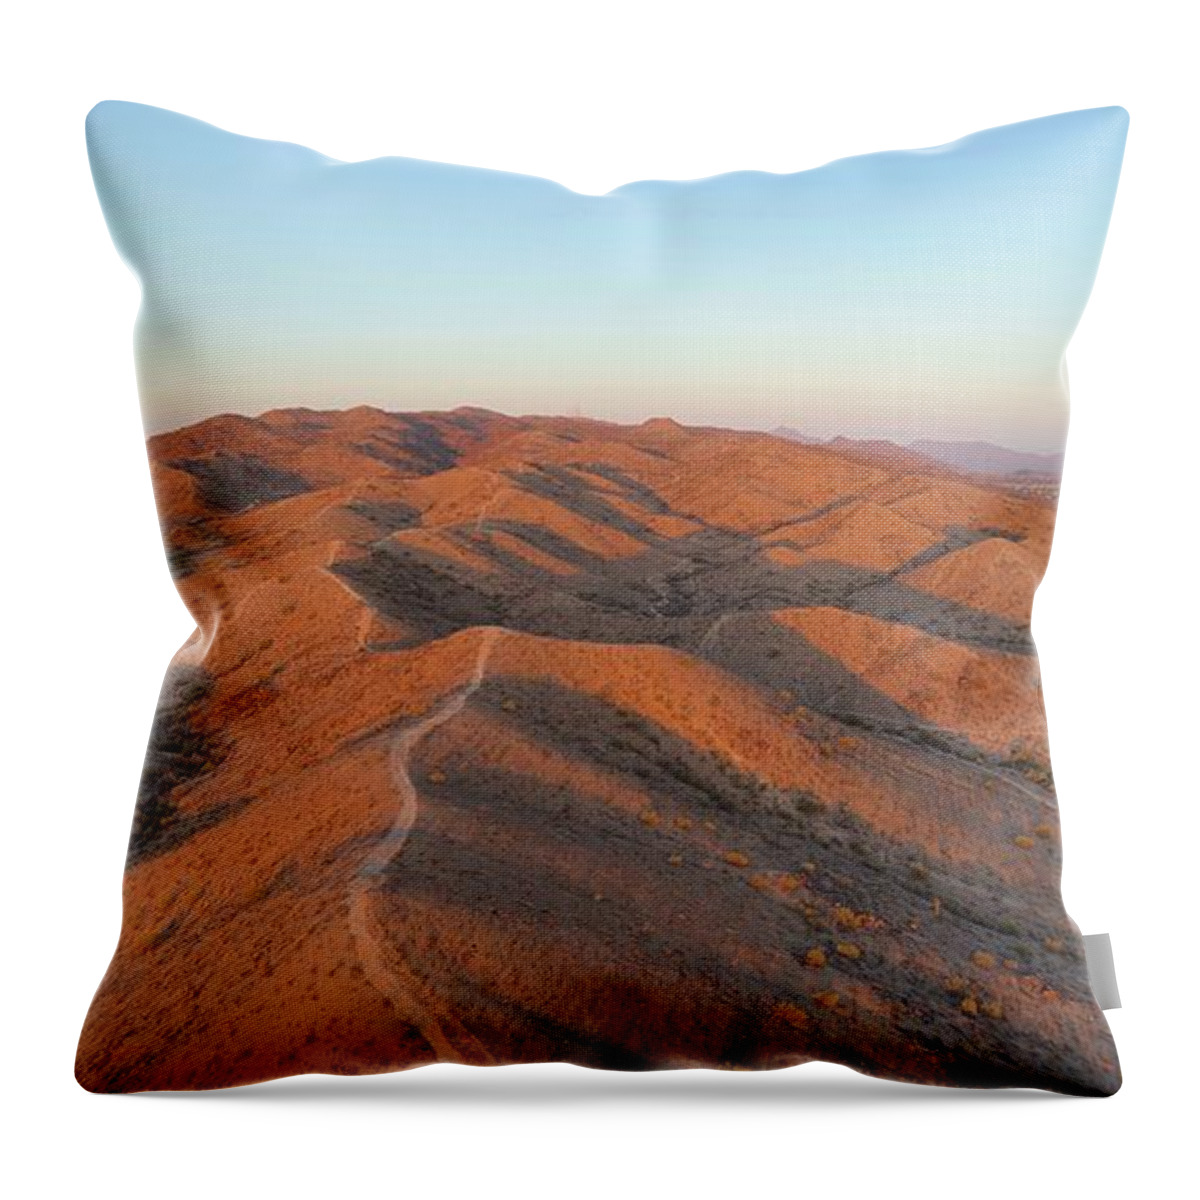 Sunrise Throw Pillow featuring the photograph South Mountain Sunrise by Anthony Giammarino